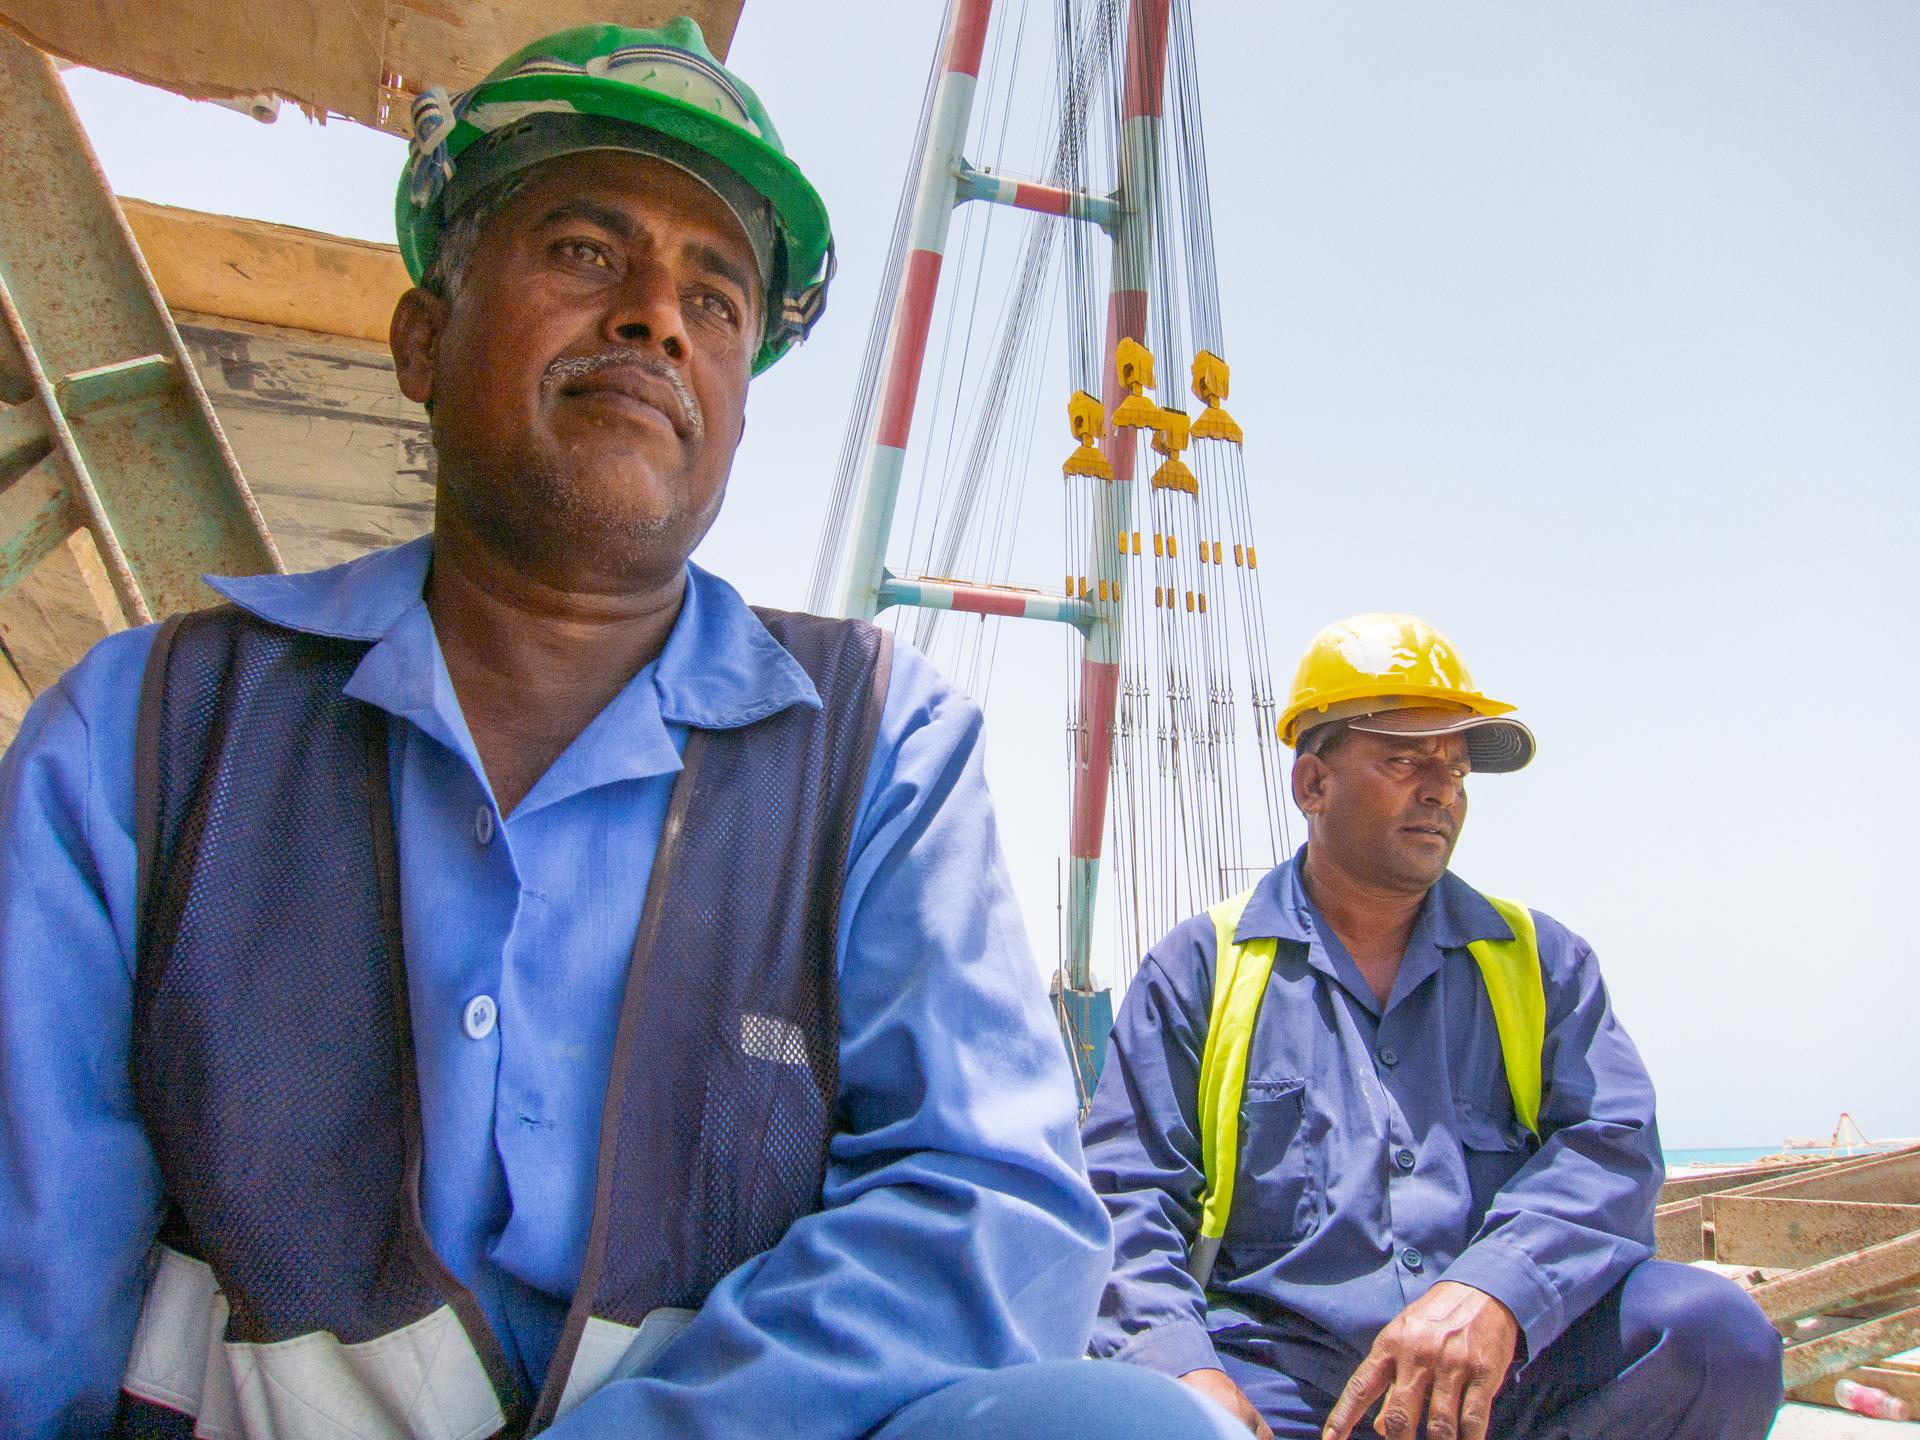 Construction engineers from Pakistan are among the thousands of workers building a metropolis in the desert. Join the journey at outofedenwalk.org.